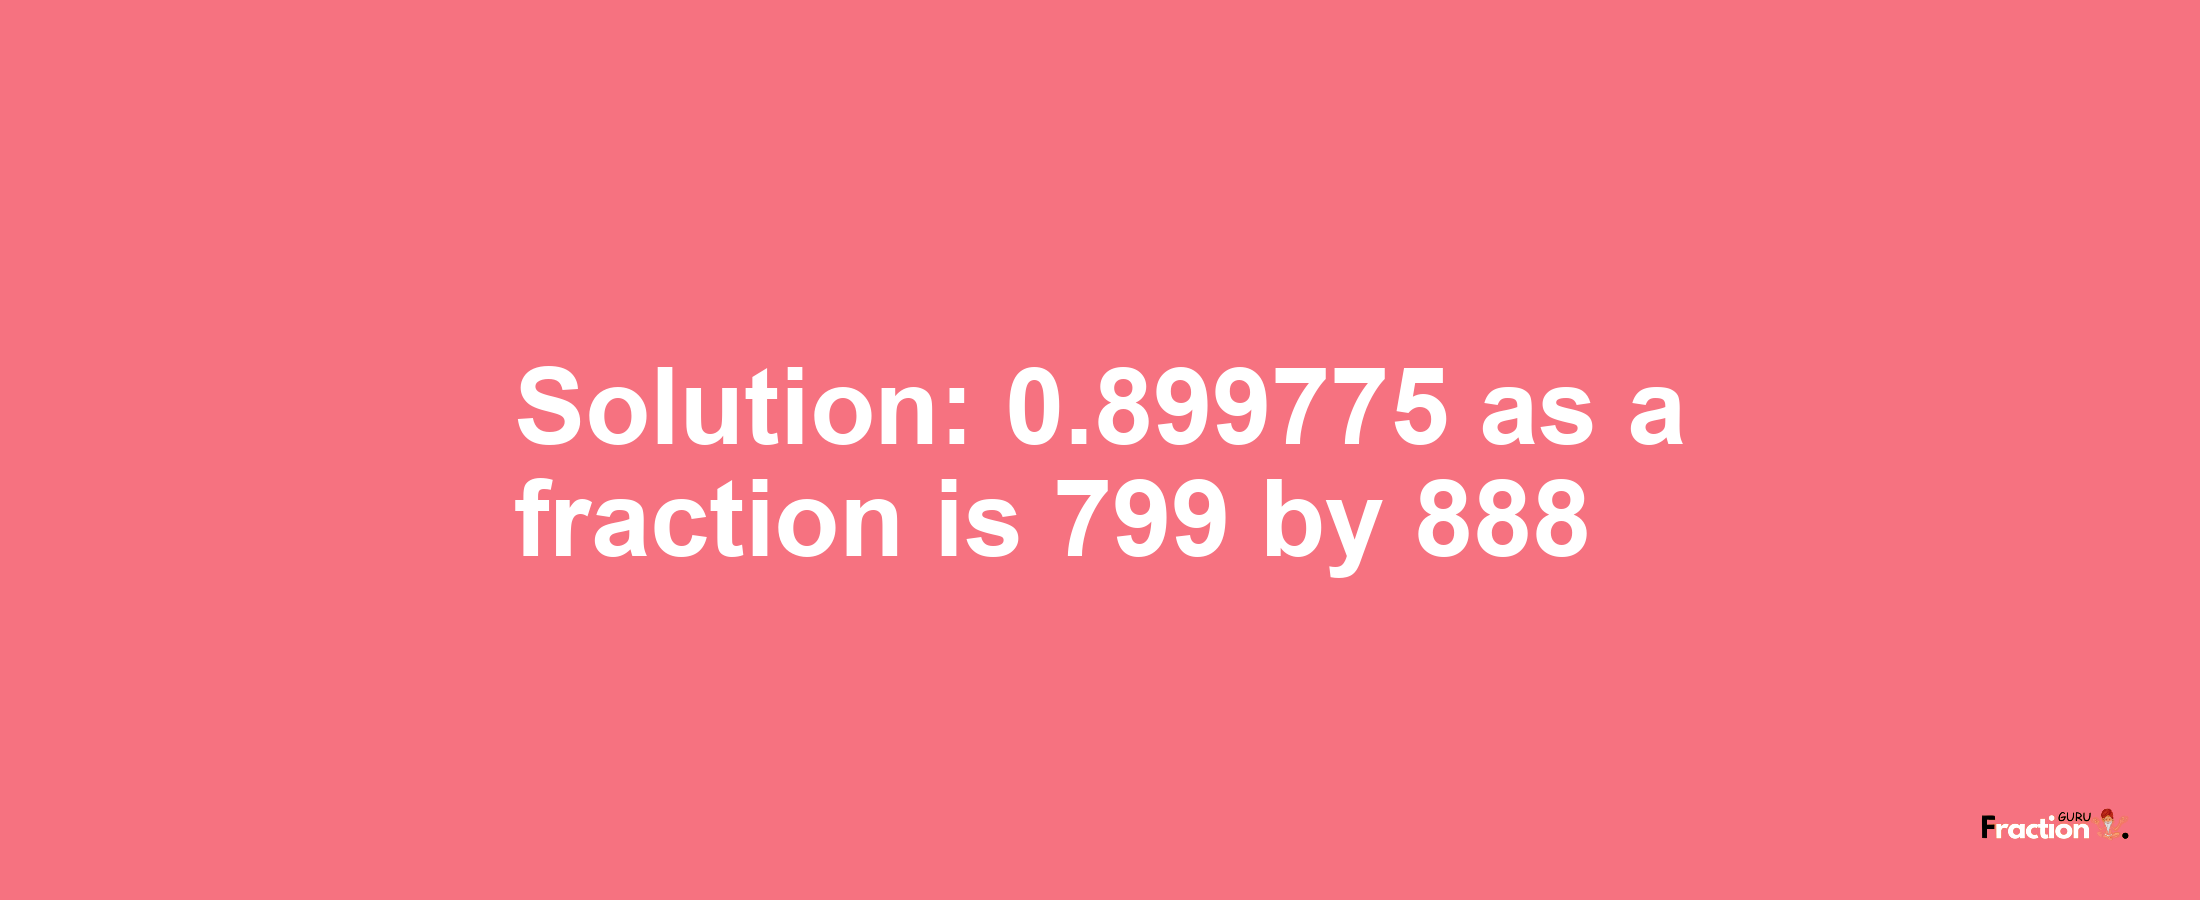 Solution:0.899775 as a fraction is 799/888